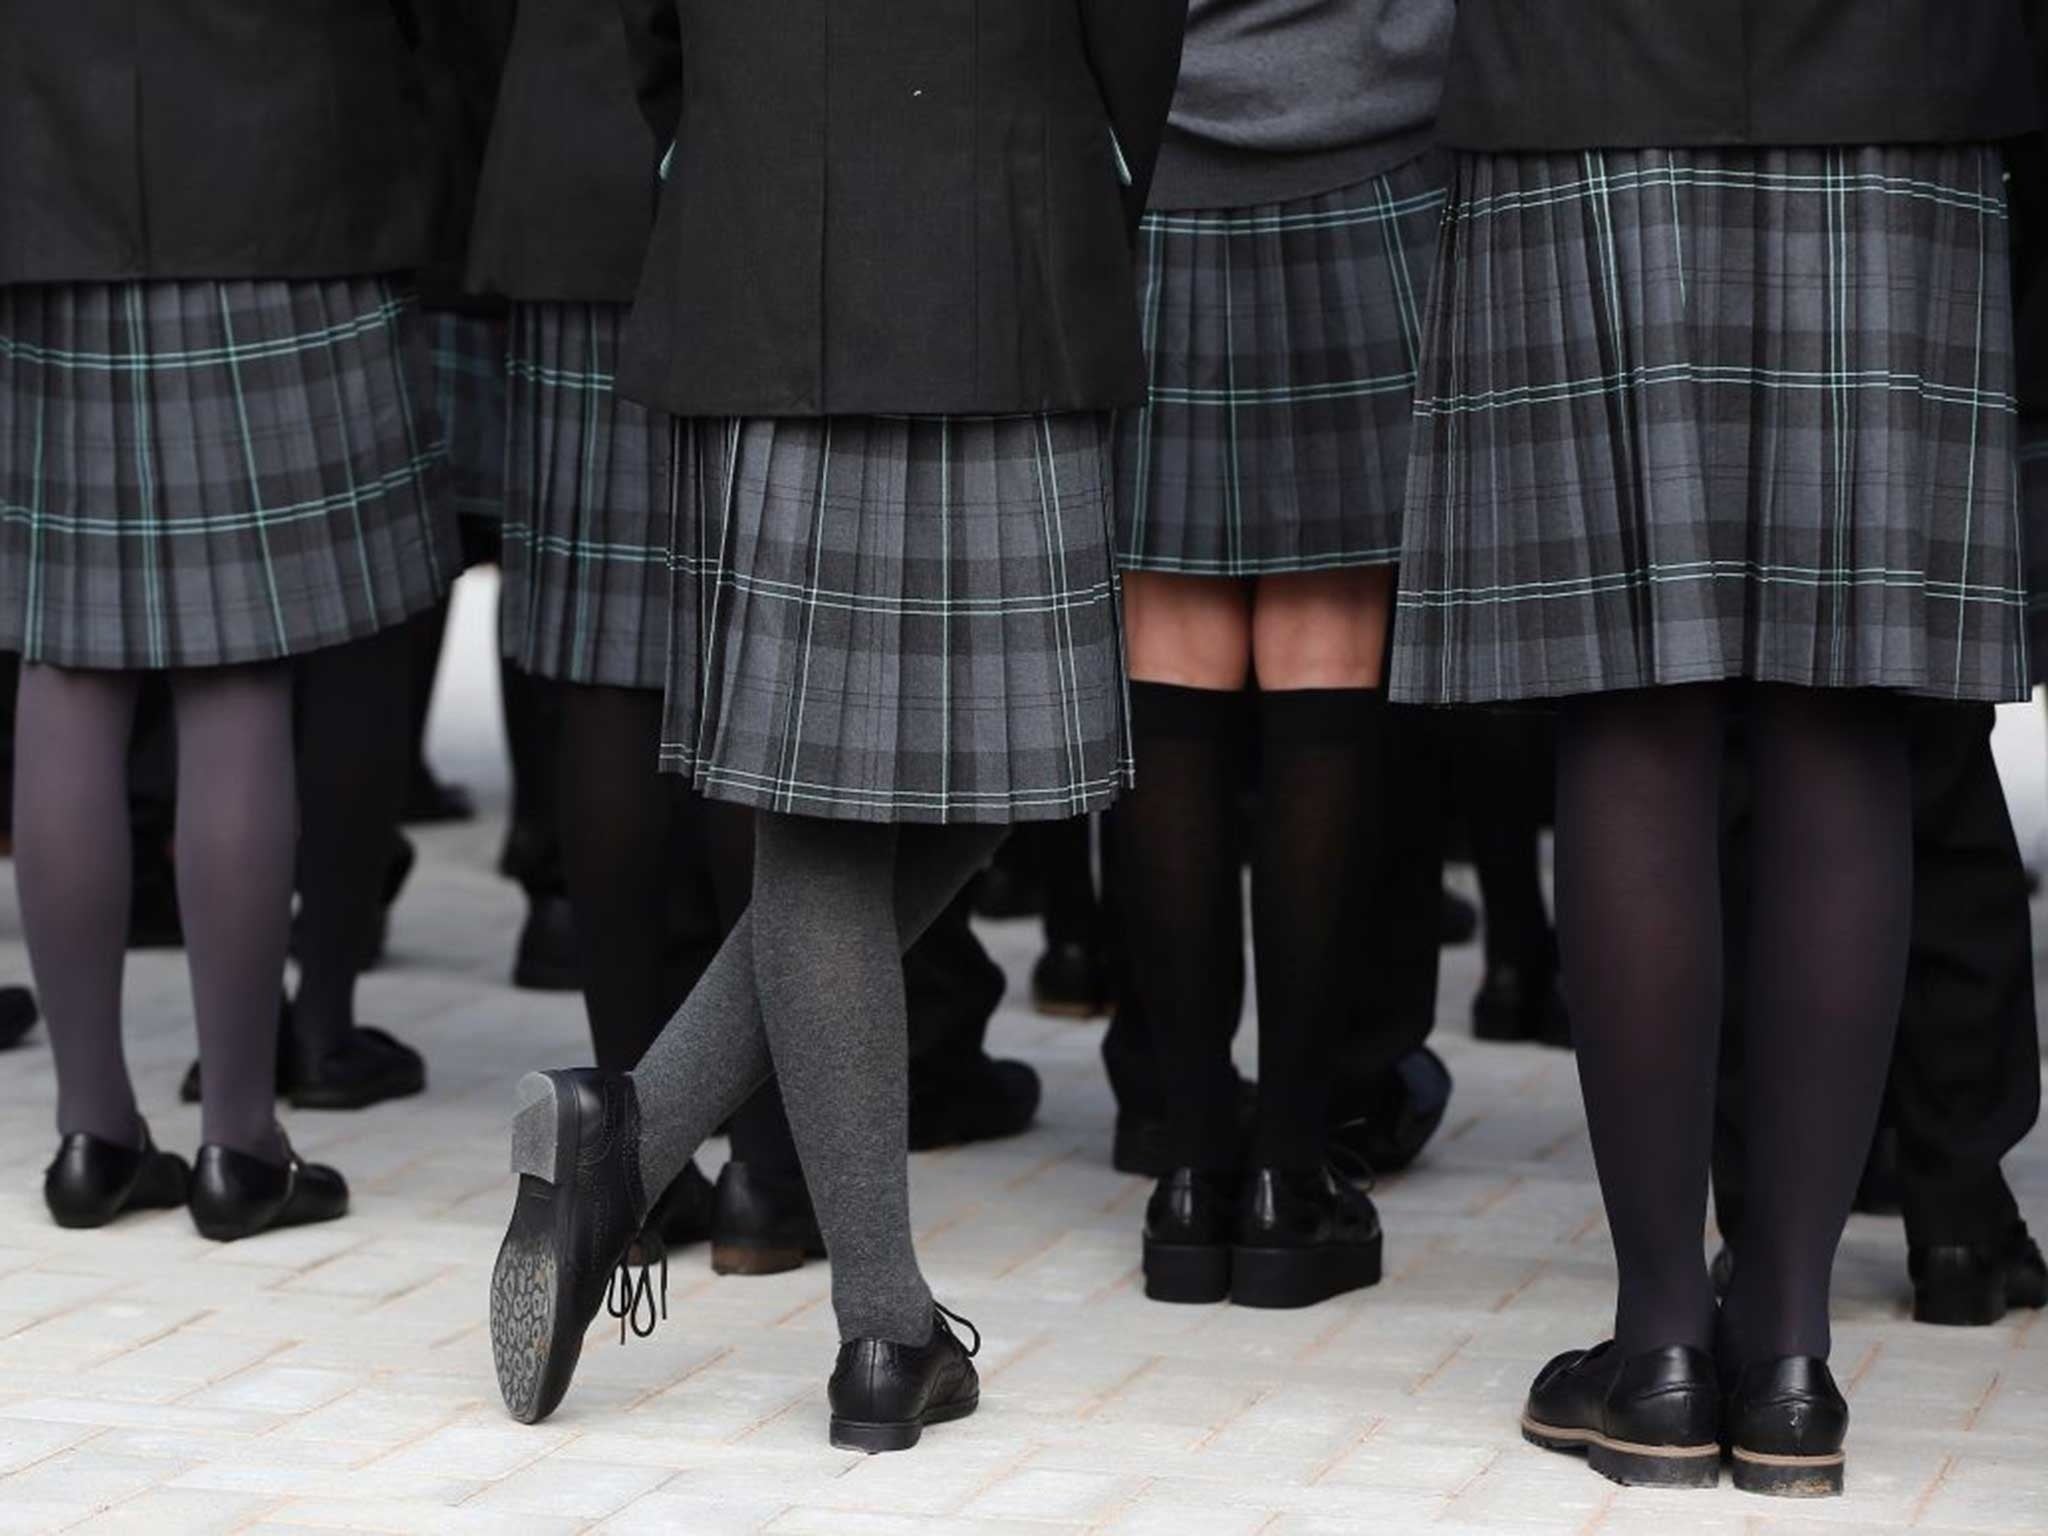 Girl Uniform Porn - Pupils demand 'school uniforms' stop being sold in sex shops after wolf  whistles | The Independent